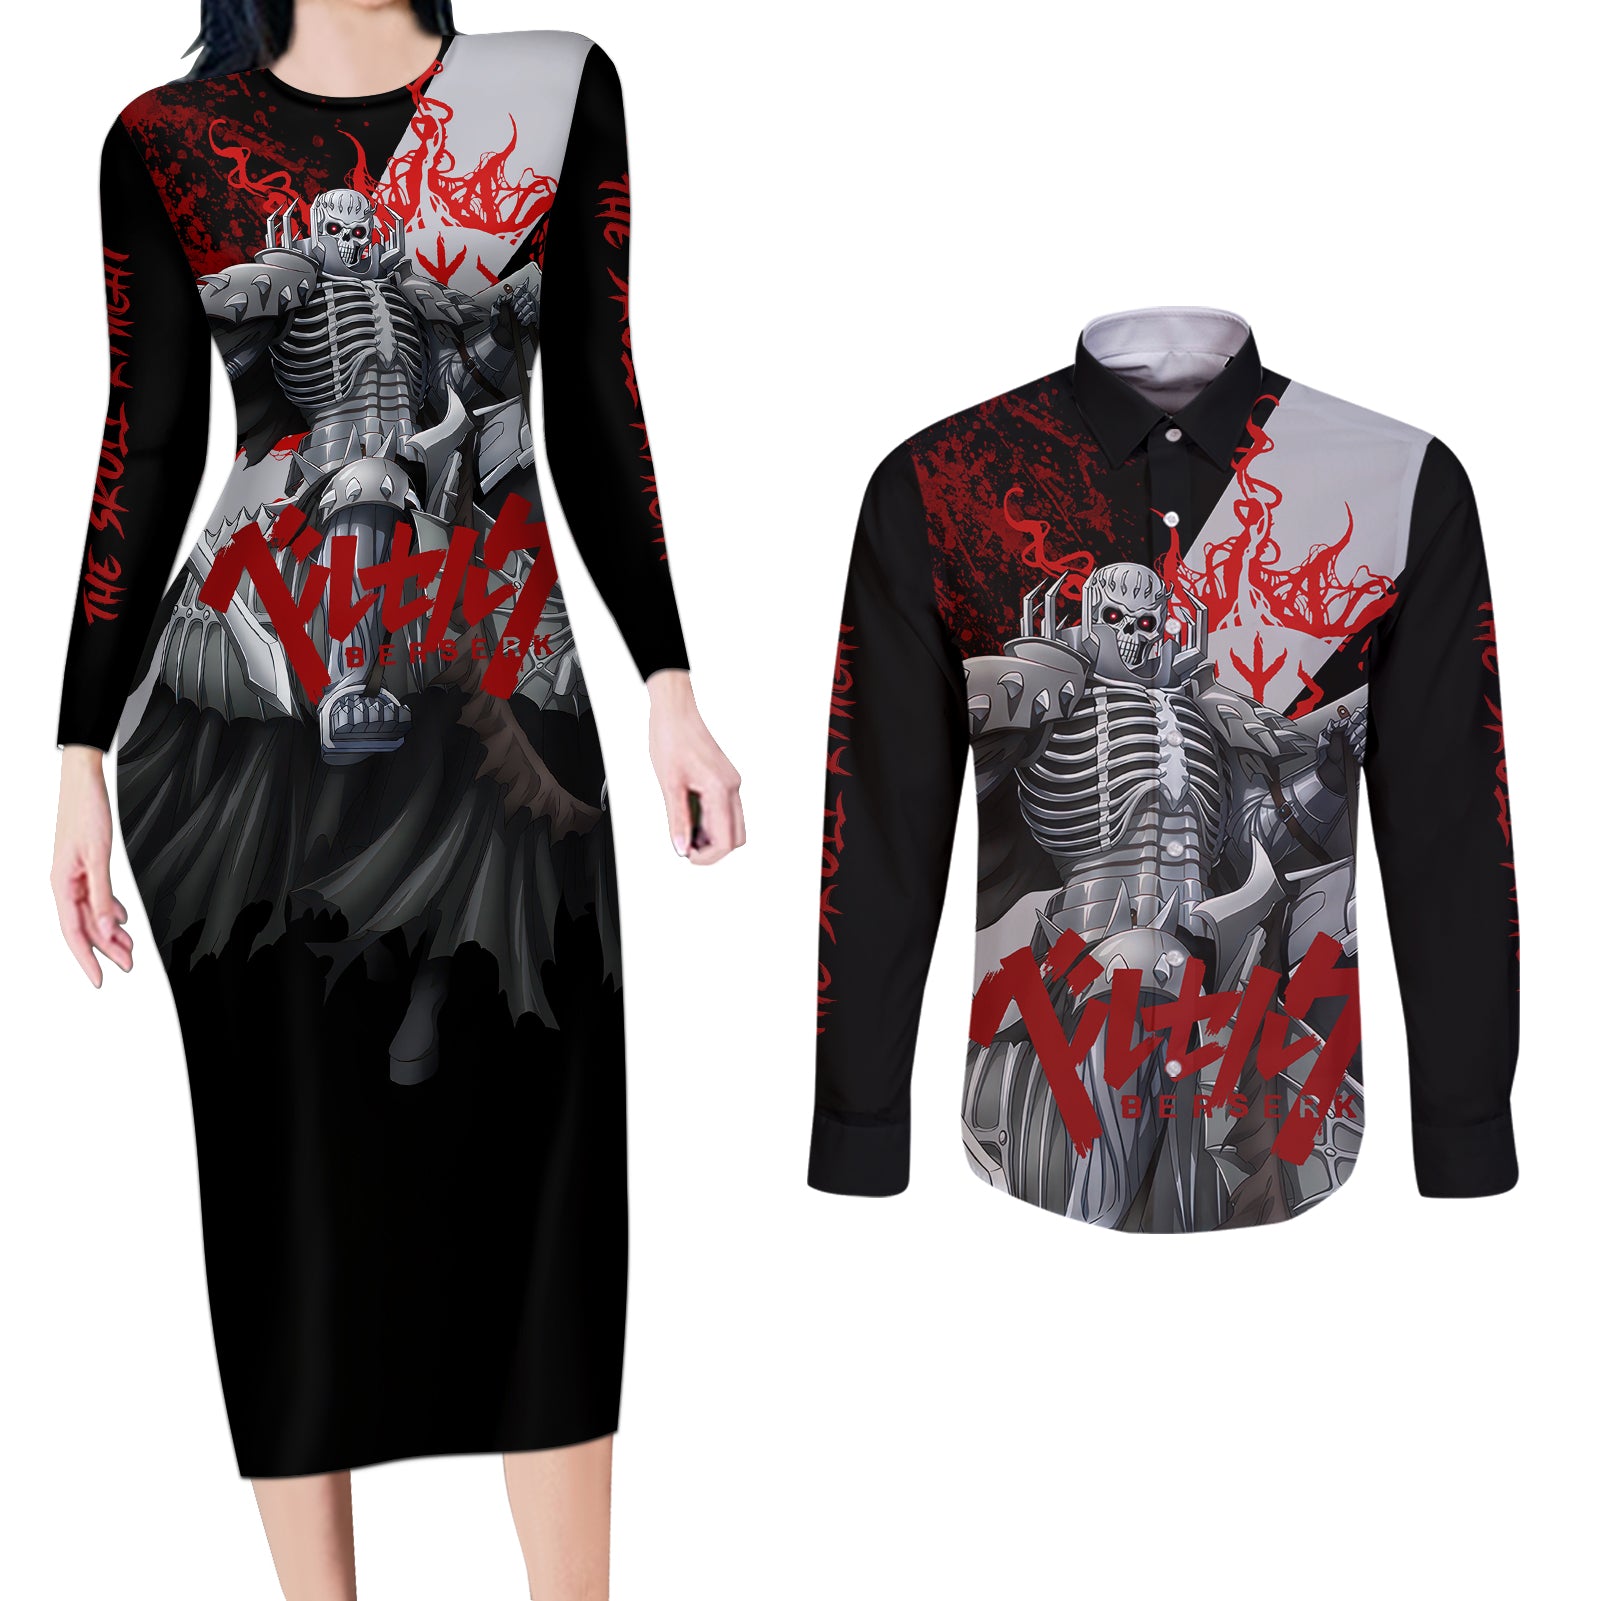 The Skull Knight Berserk Couples Matching Long Sleeve Bodycon Dress and Long Sleeve Button Shirt Black Blood Style